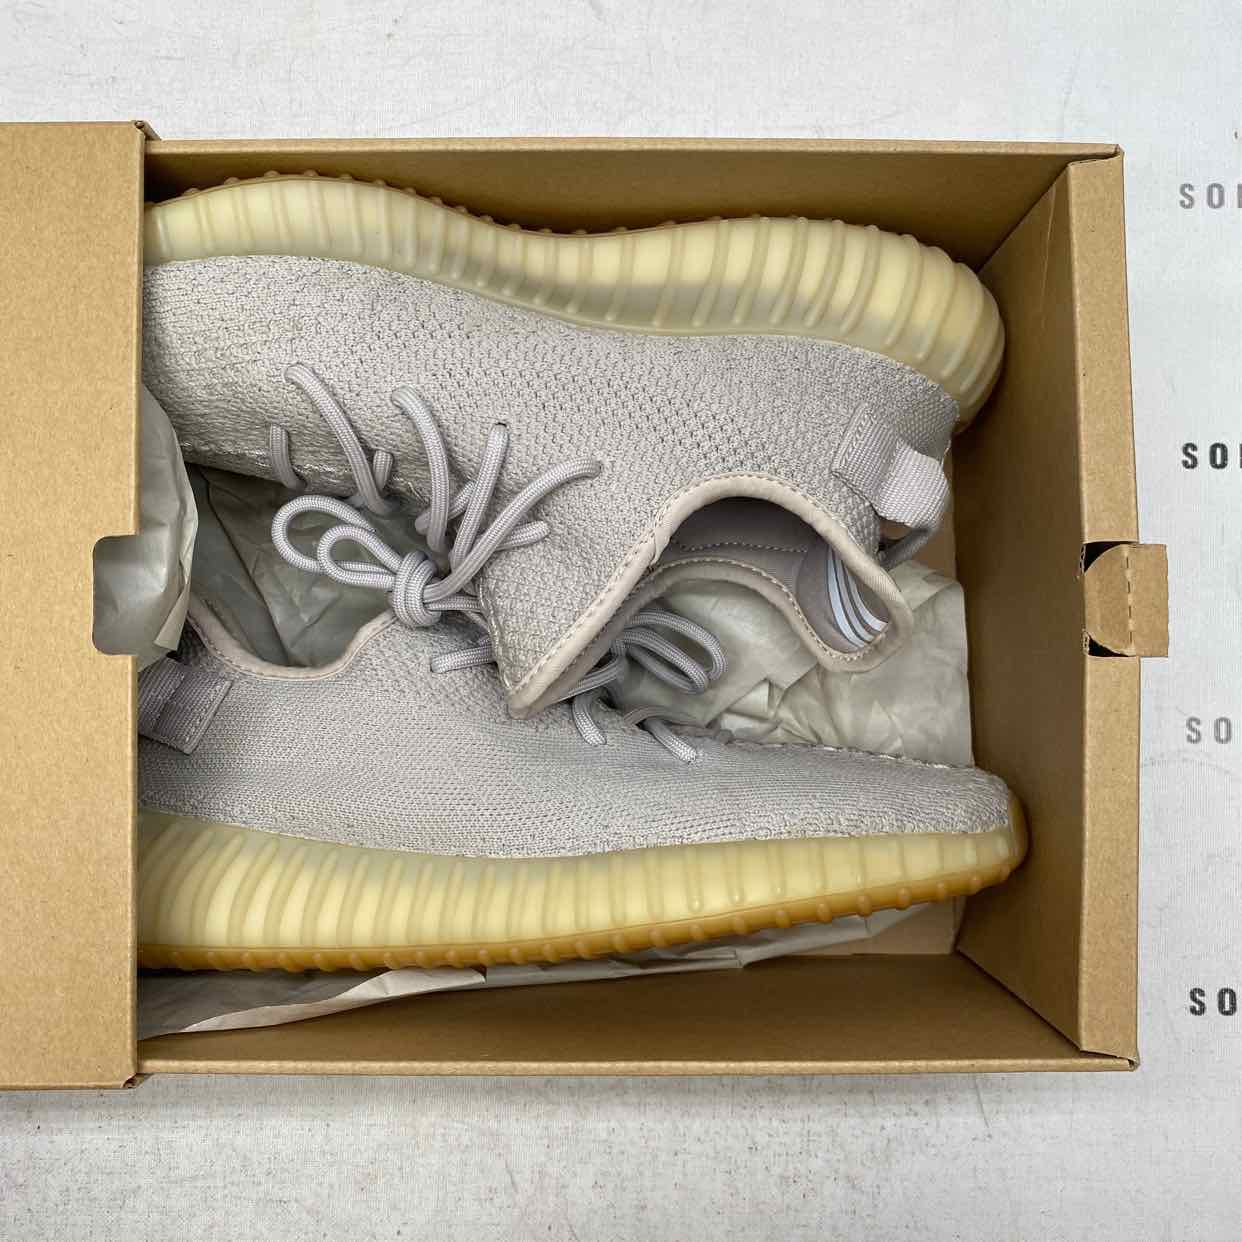 Yeezy 350 v2 &quot;Sesame&quot; 2018 Used Size 10